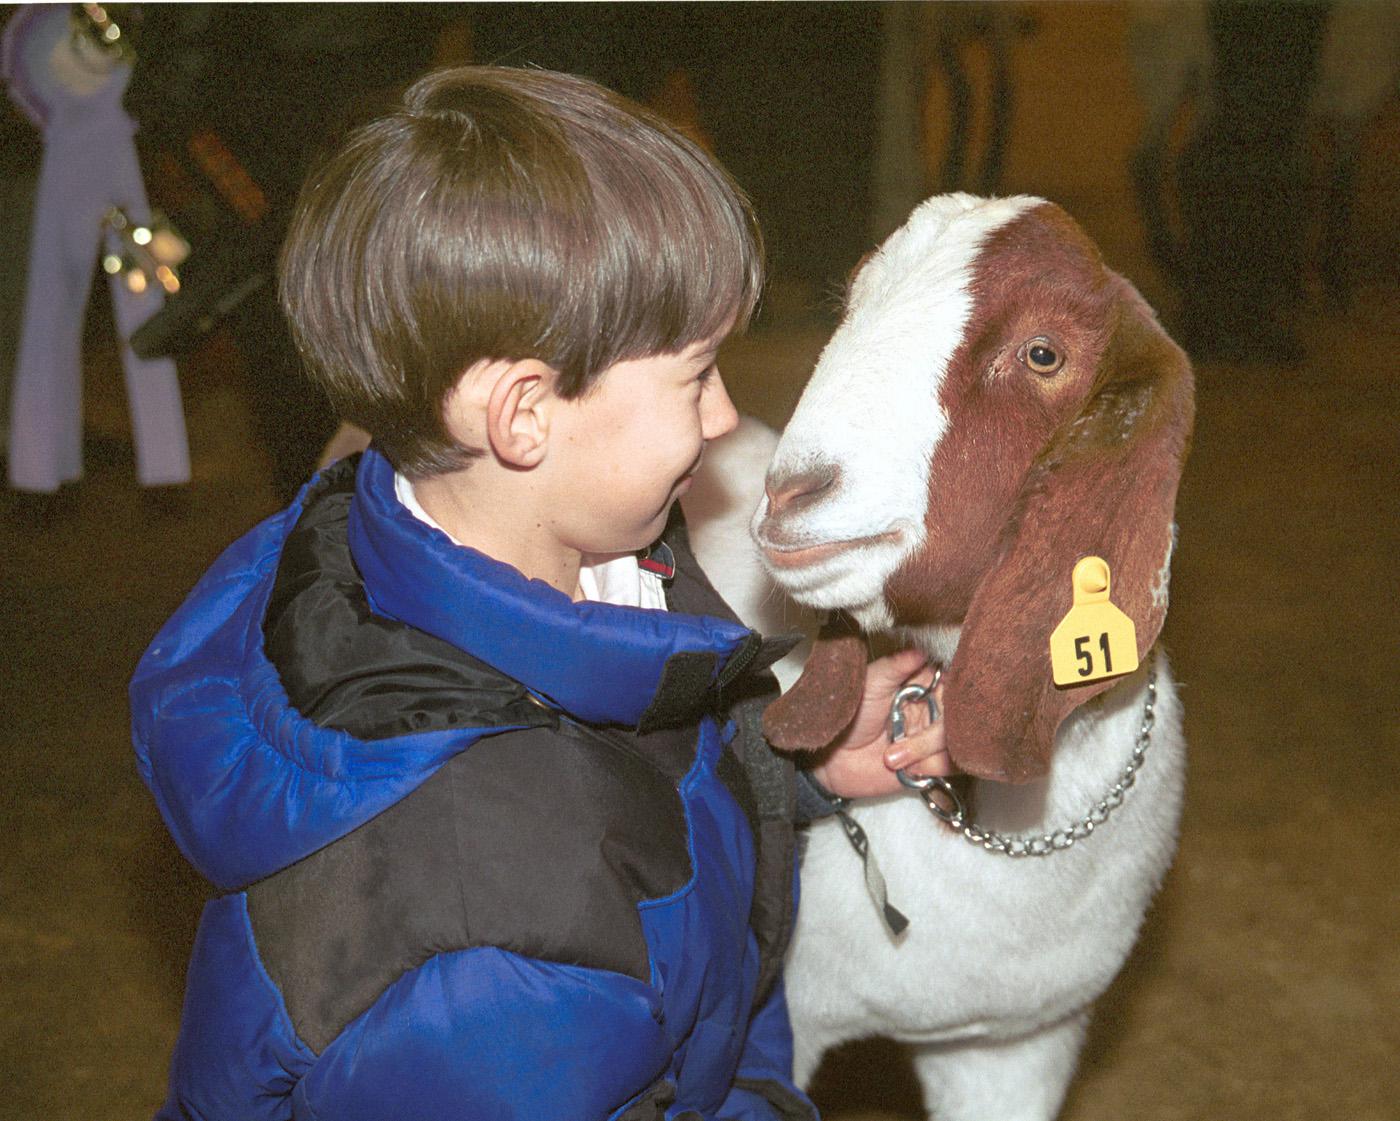 Ten-year-old Nolan Webb of Lafayette County 4-H has one last visit with Showboy, the grand champion market goat at the 2002 Dixie National Junior Livestock Show in Jackson, Miss., on Feb. 7, 2002.